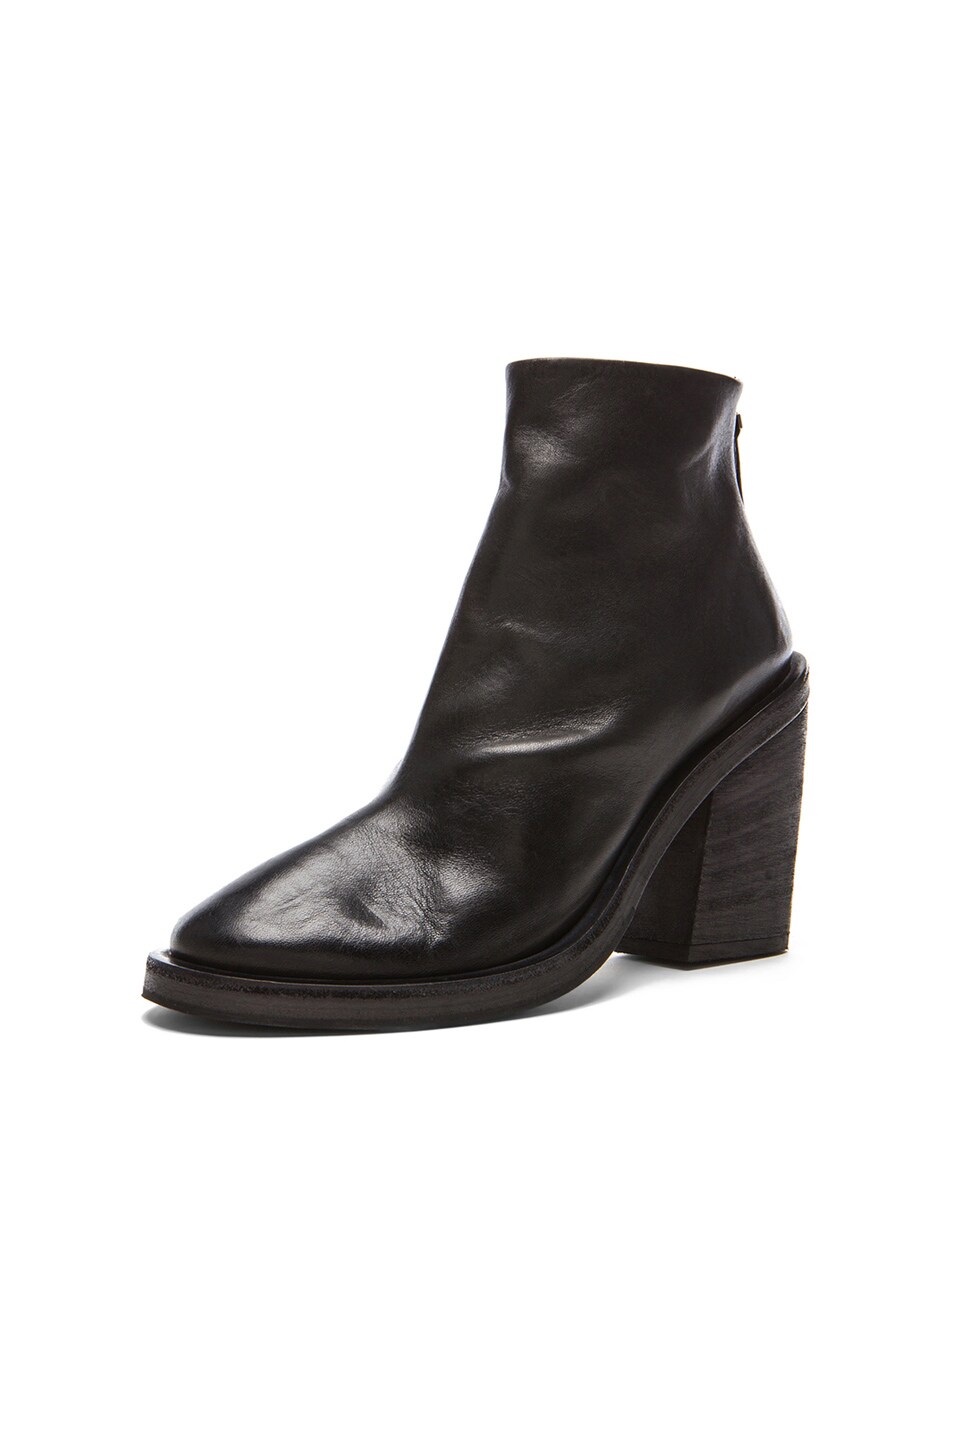 Marsell Leather Ankle Booties in Nero | FWRD